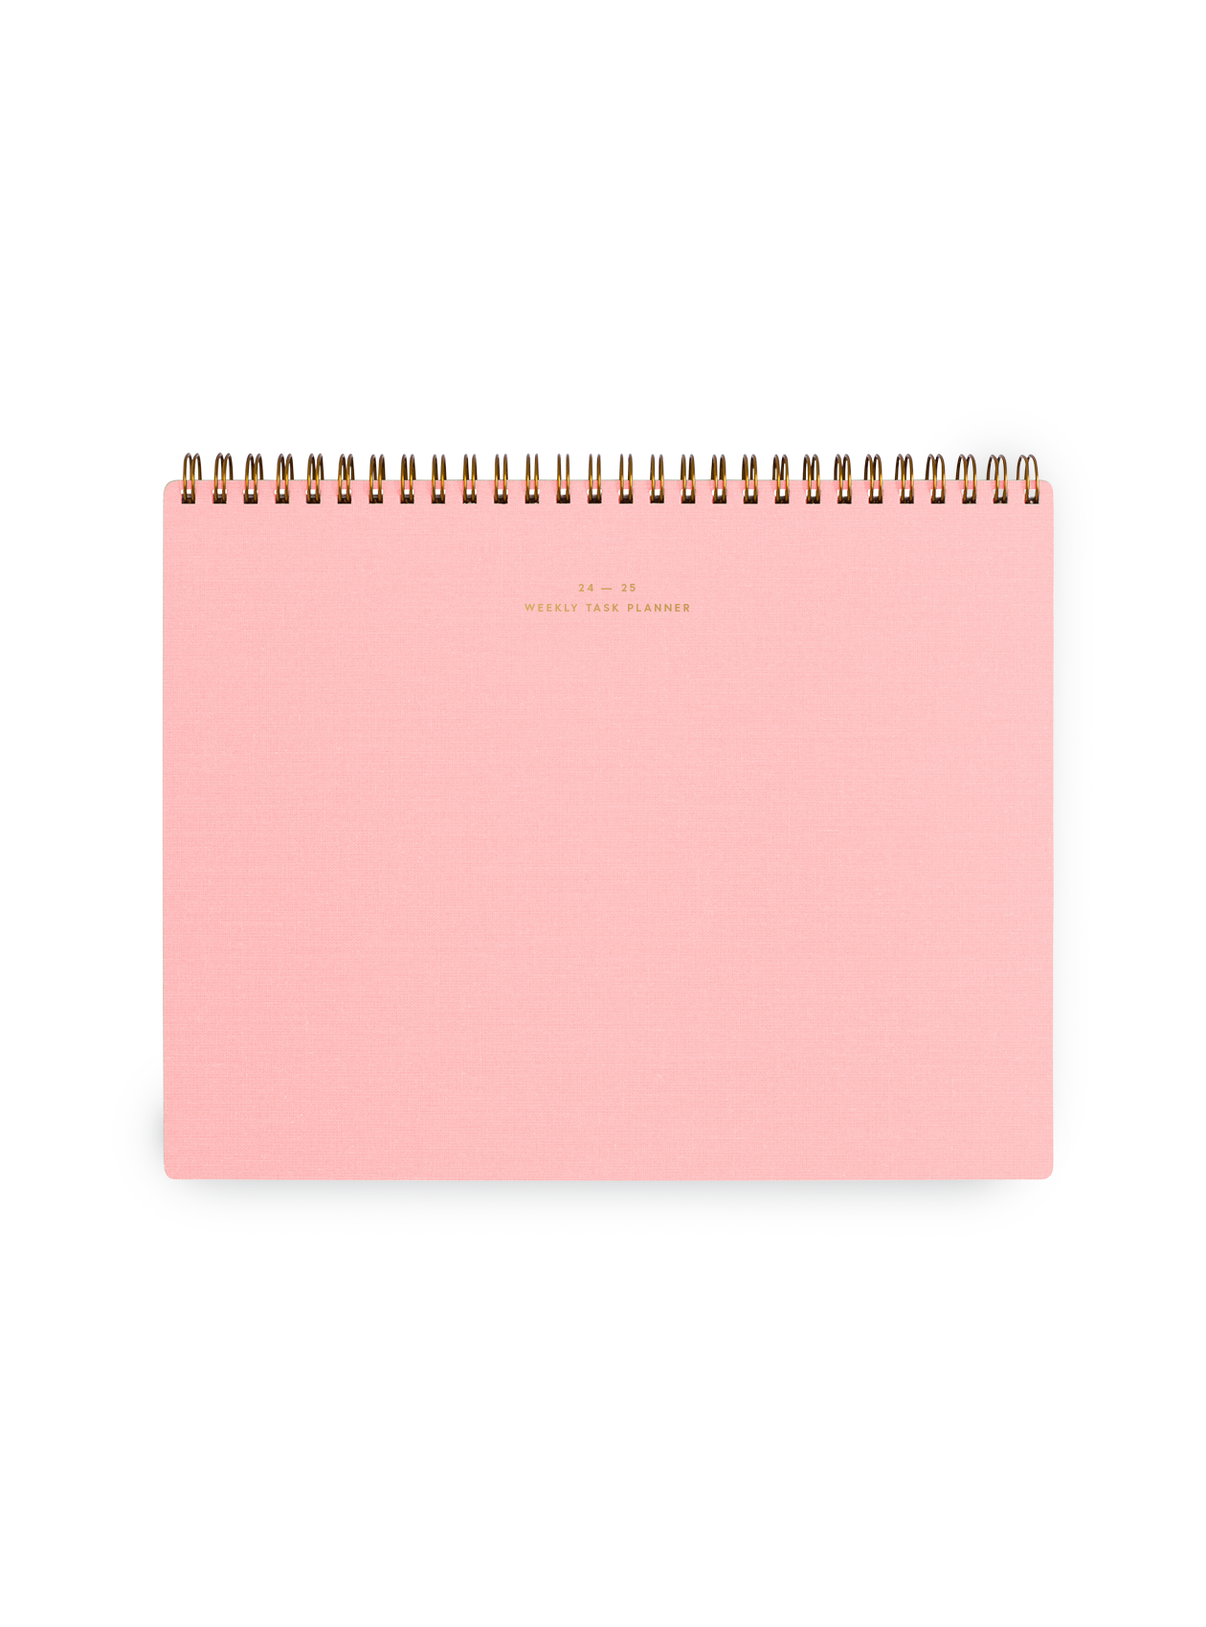 Appointed top-bound 24-25 Weekly Task Planner with brass wire-o binding and gold foil details || Blossom Pink